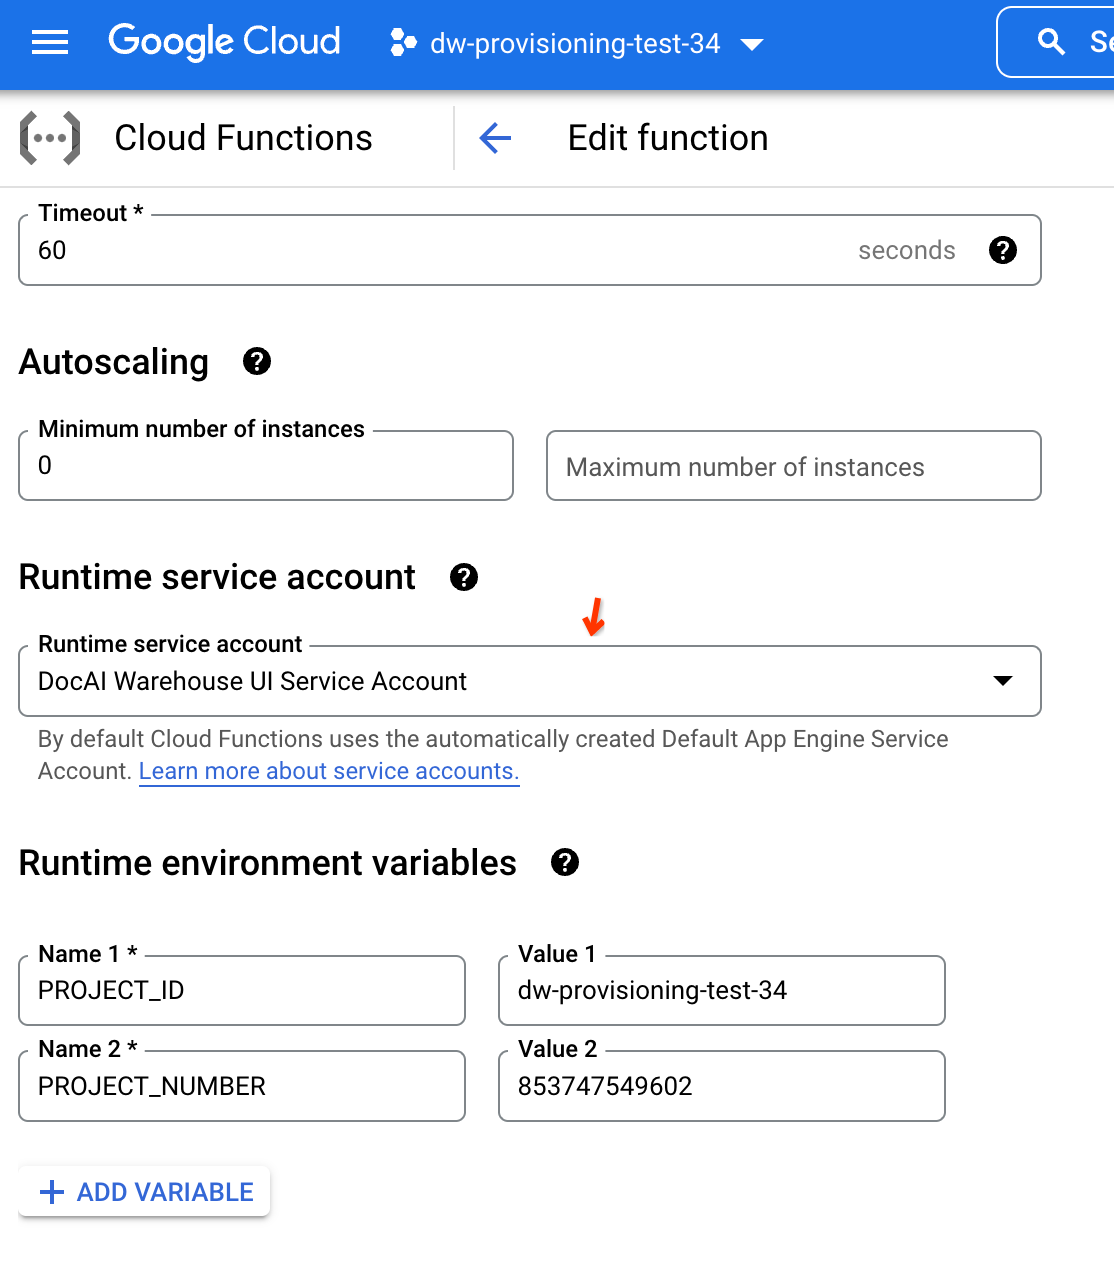 configure to use the DW UI service account